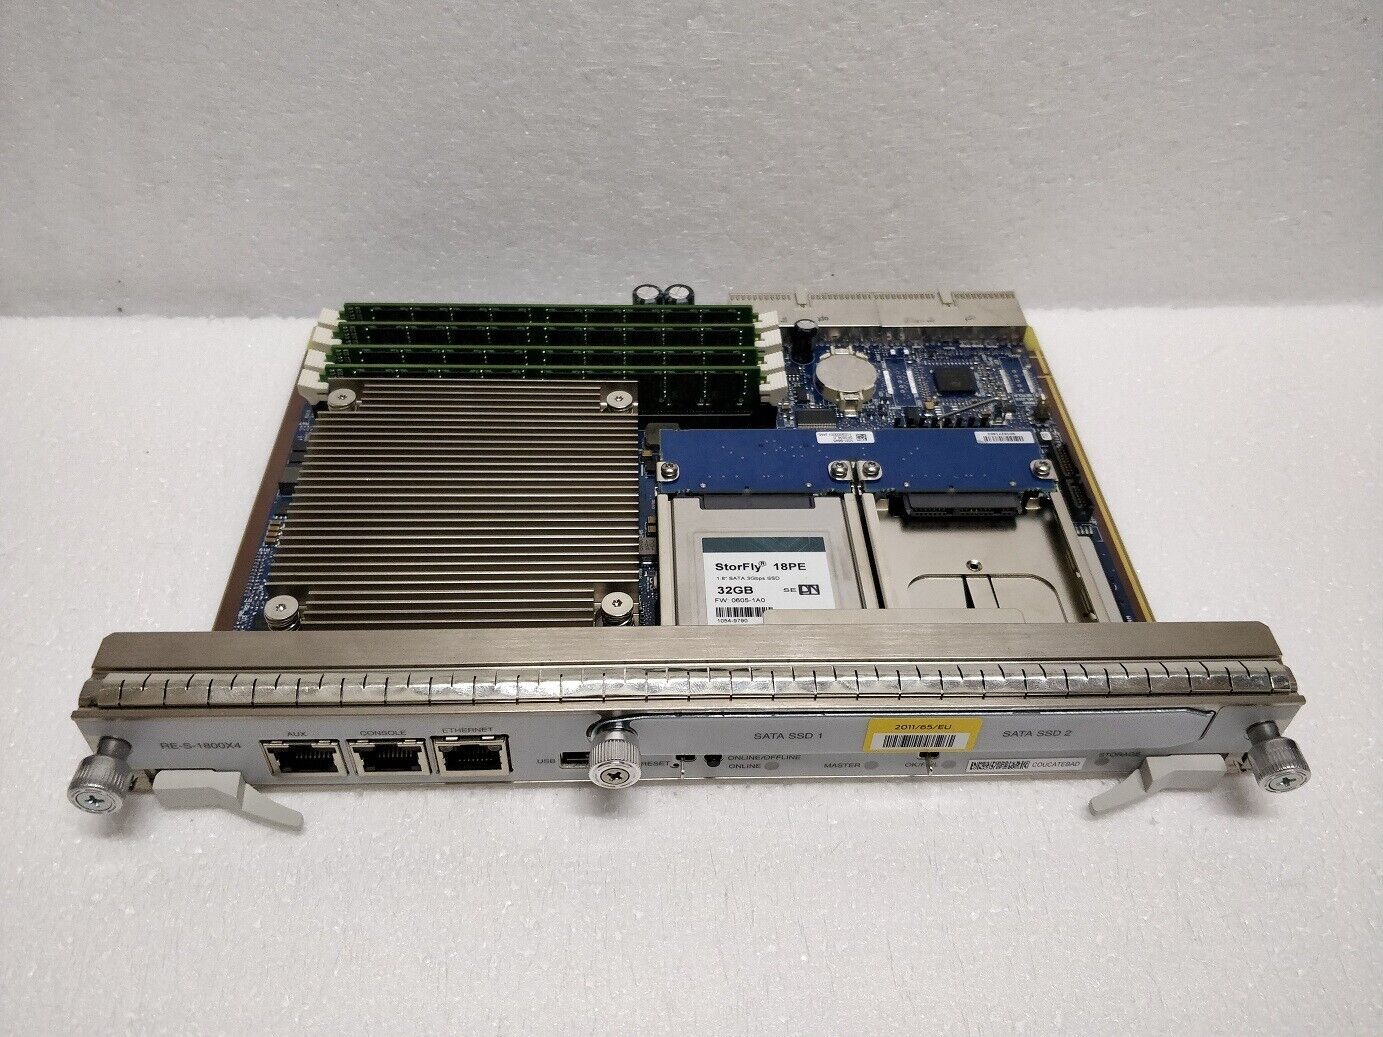 Juniper RE-S-1800X4-32G 4-Core 1.8GHz with 32GB RAM Routing Engine MX240 480 960